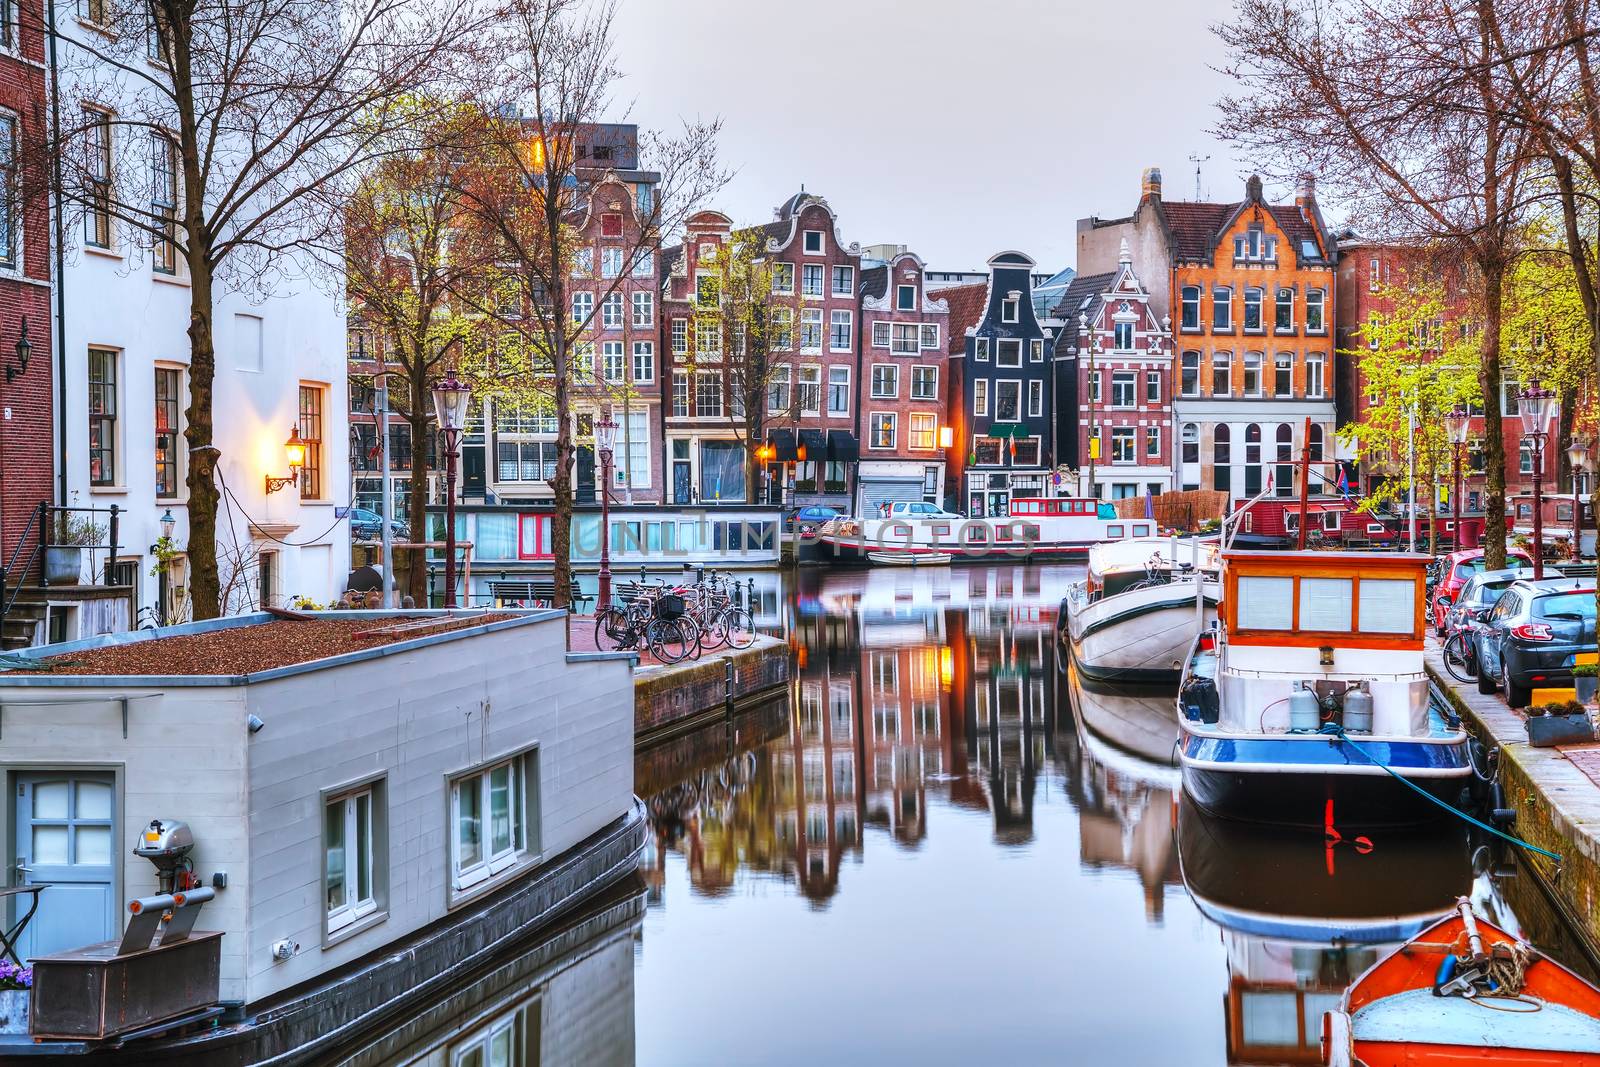 Overview of Amsterdam by AndreyKr